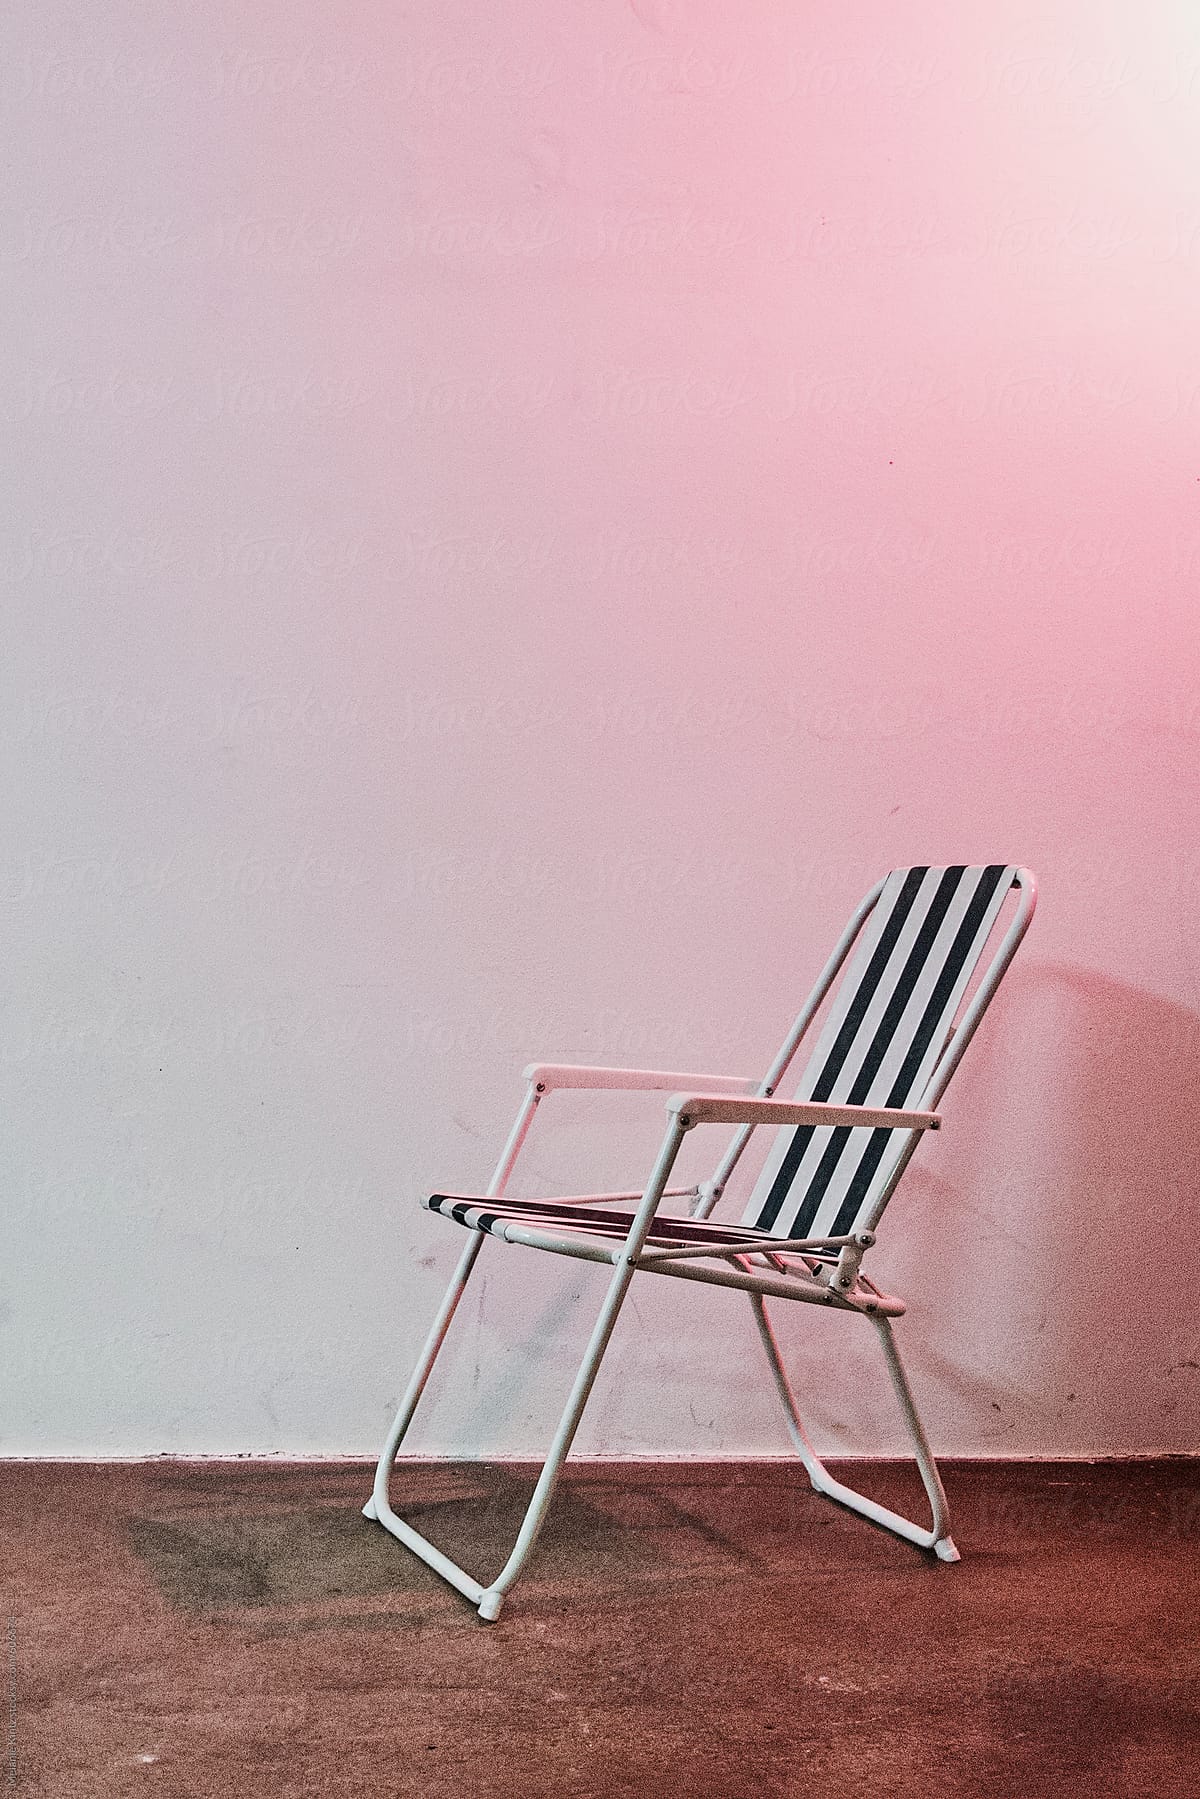 Beach chair in a room lit by a red 